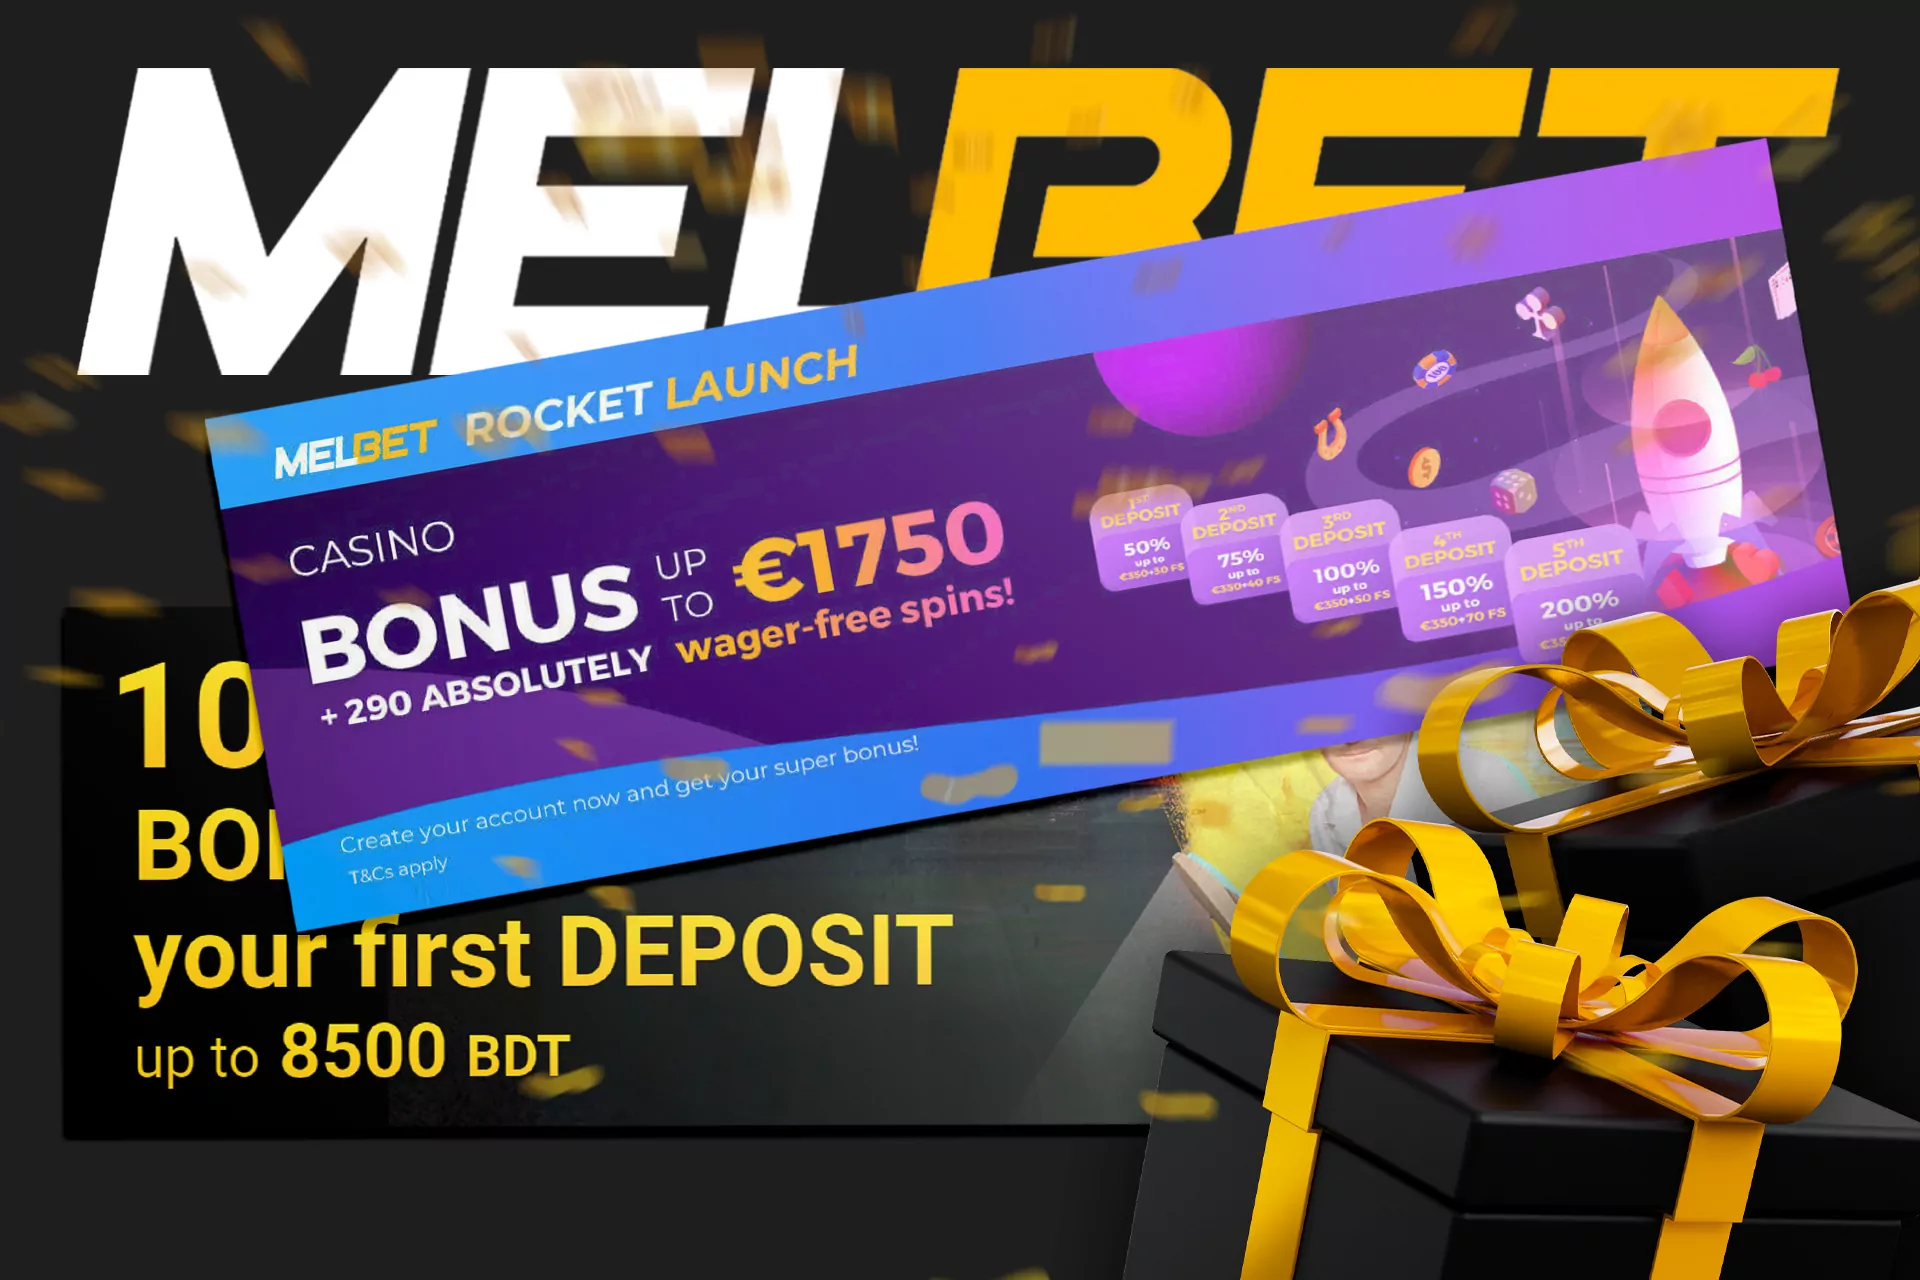 Get Melbet welcome bonus of 100% up to 10,000 BDT for sports betting.